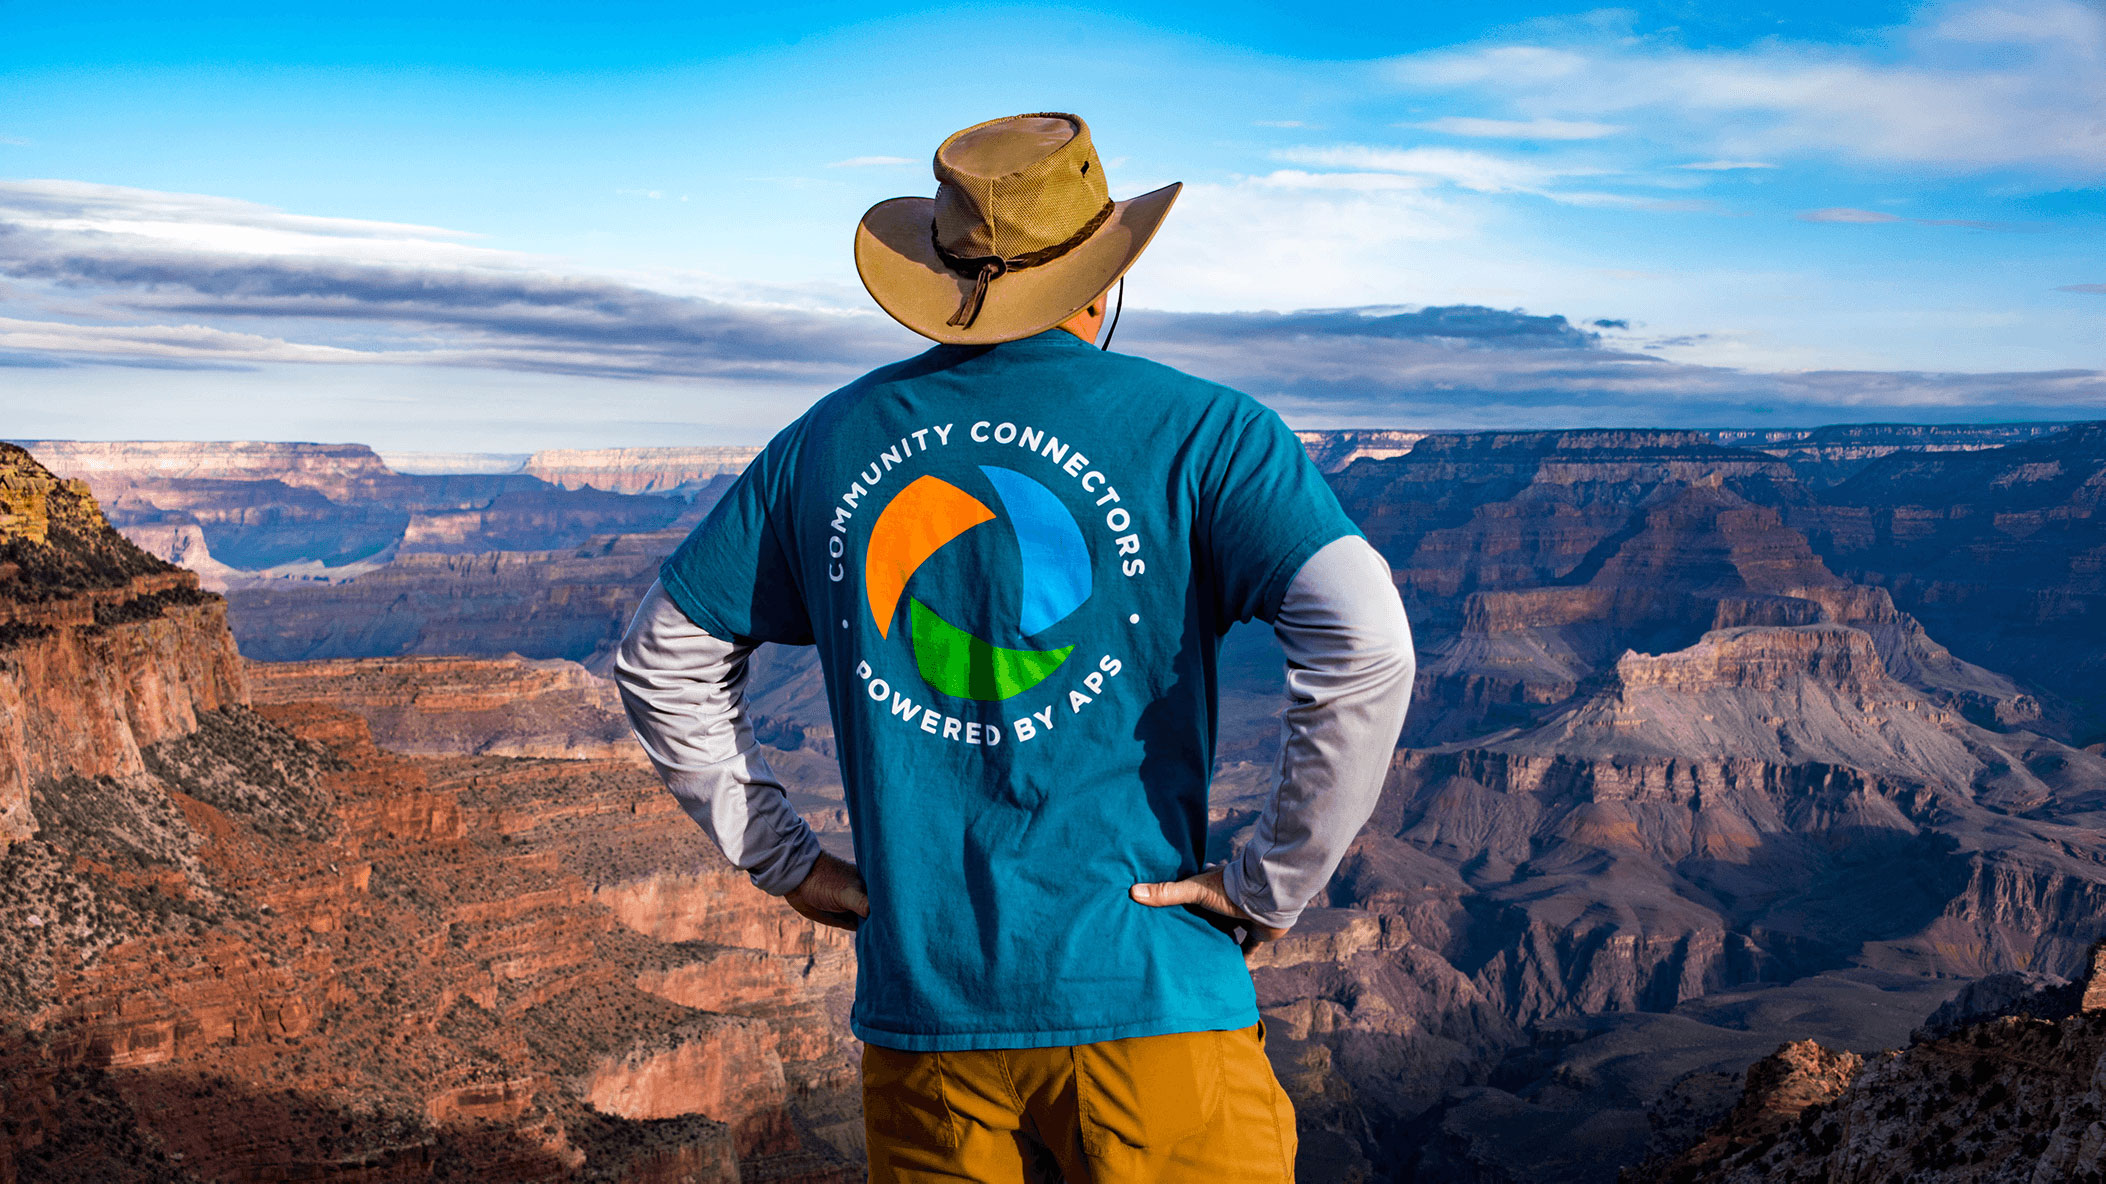 APS employee standing on mountain wearing community connectors branded shirt.